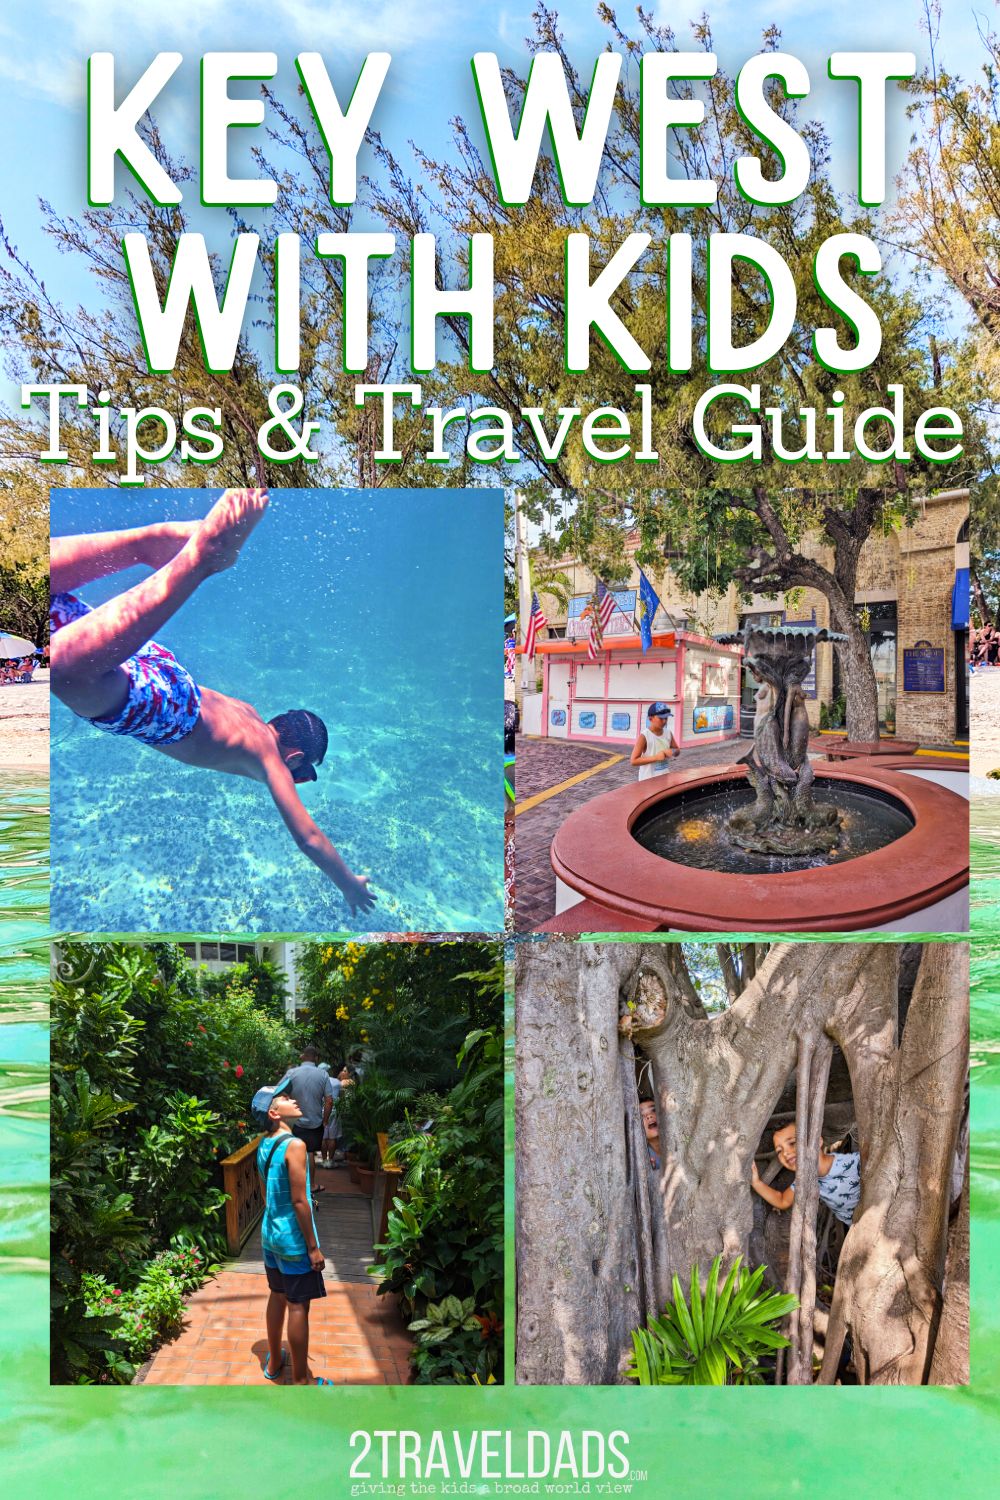 Key West with kids is really fun and a great family vacation experience. Even though you might think of Key West as a party destination, we've got tons of great ideas for visiting with kids that will keep everyone entertained and enjoying this amazing town.